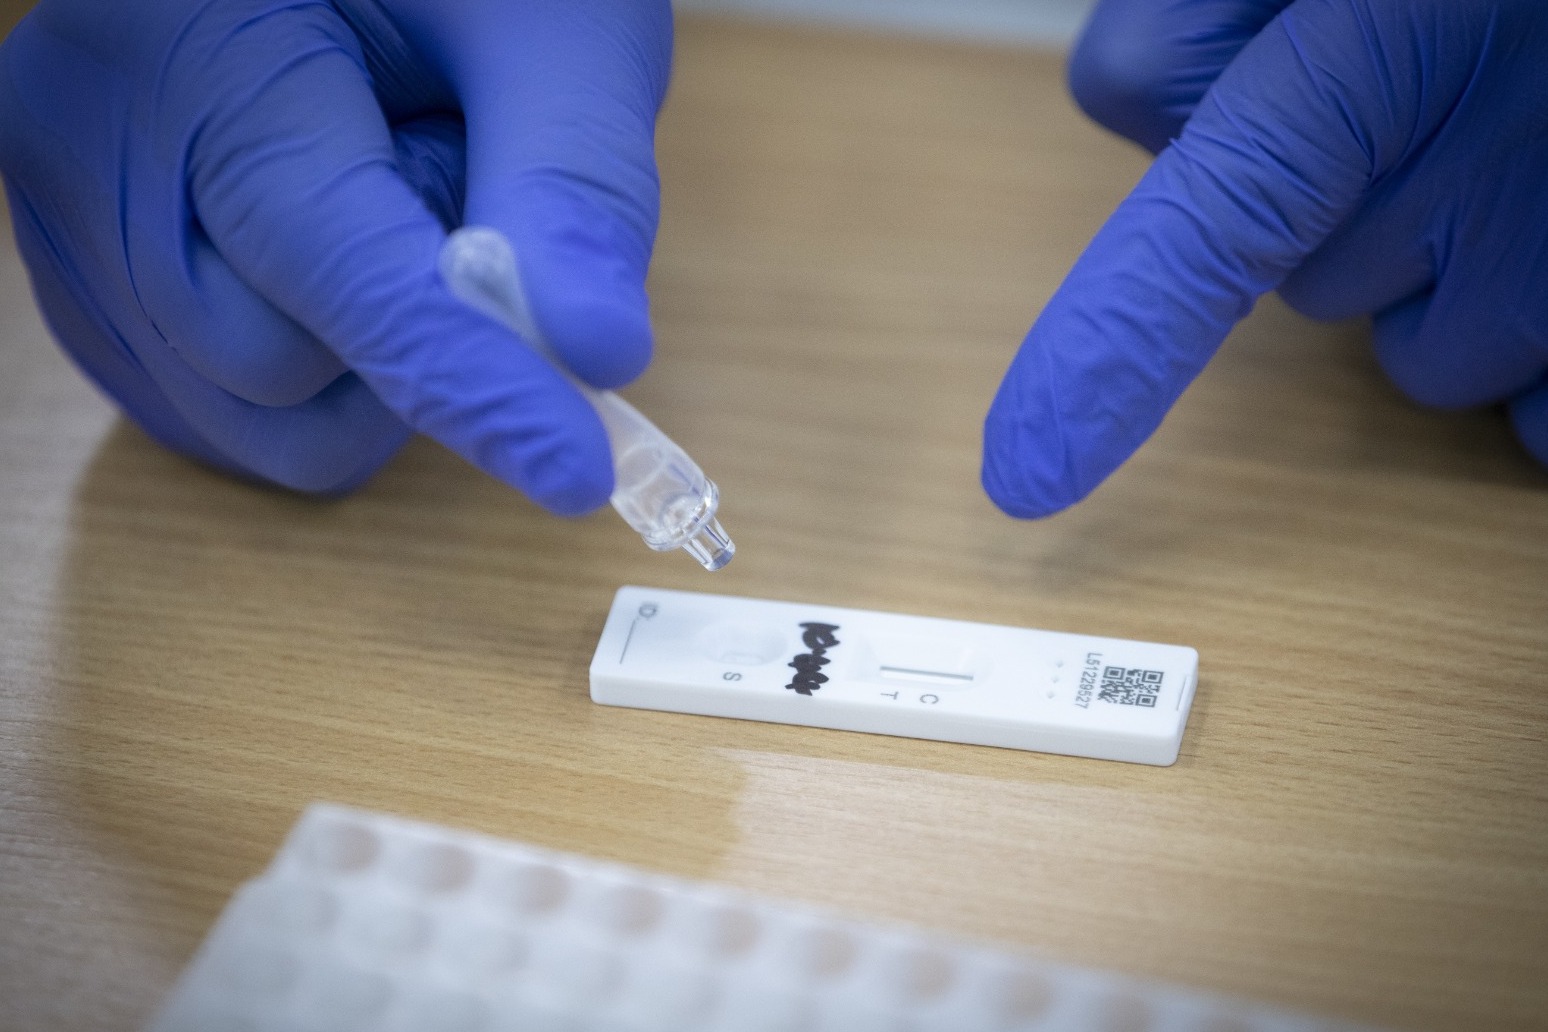 Health experts fear rapid tests may distract from vaccine work 